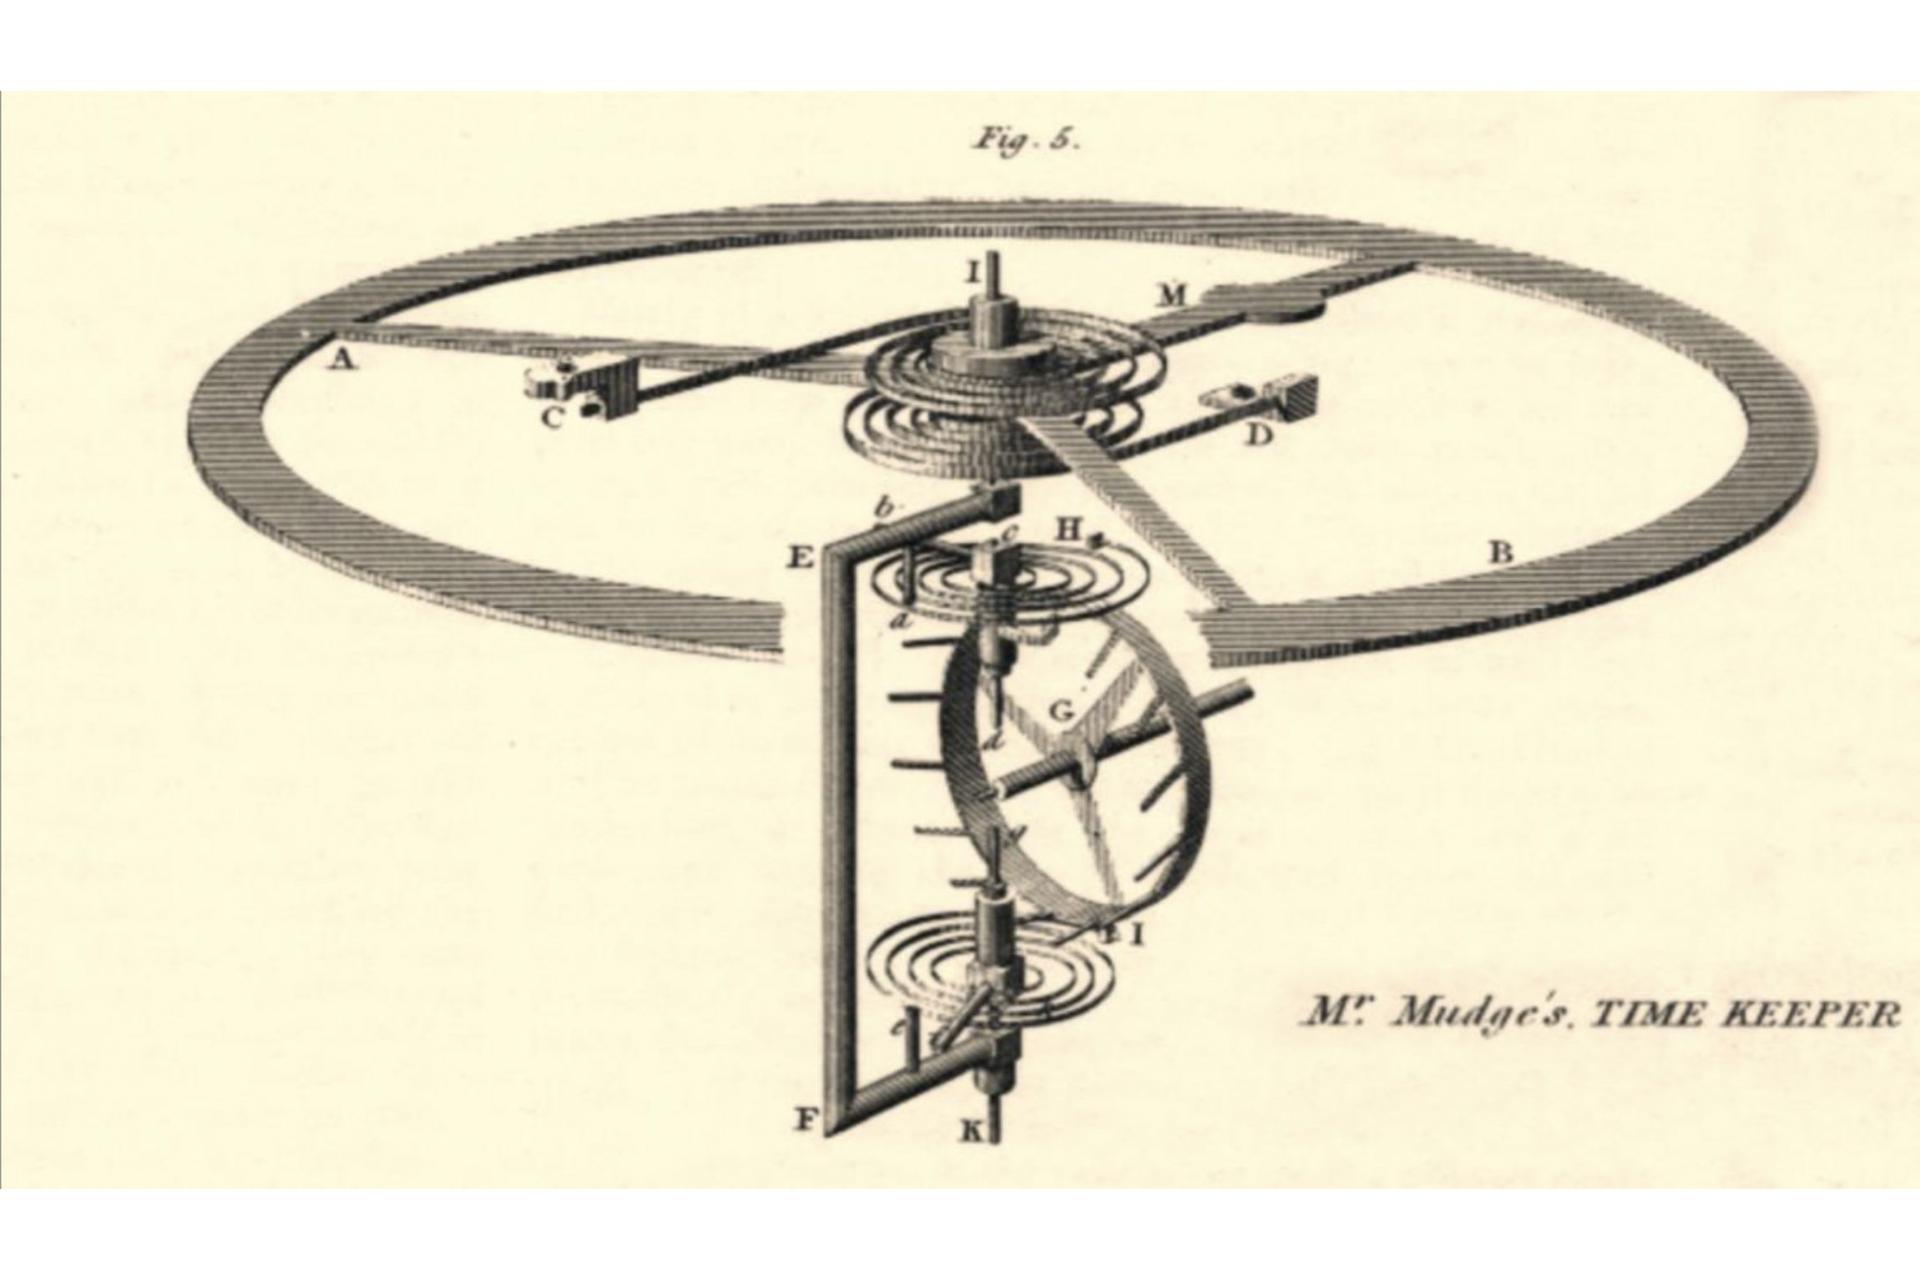 A drawing of the Constant-Force Escapement, circa 1774 by Mr. Pennington, one of Thomas Mudge's original workers Photo: Redfern Animation